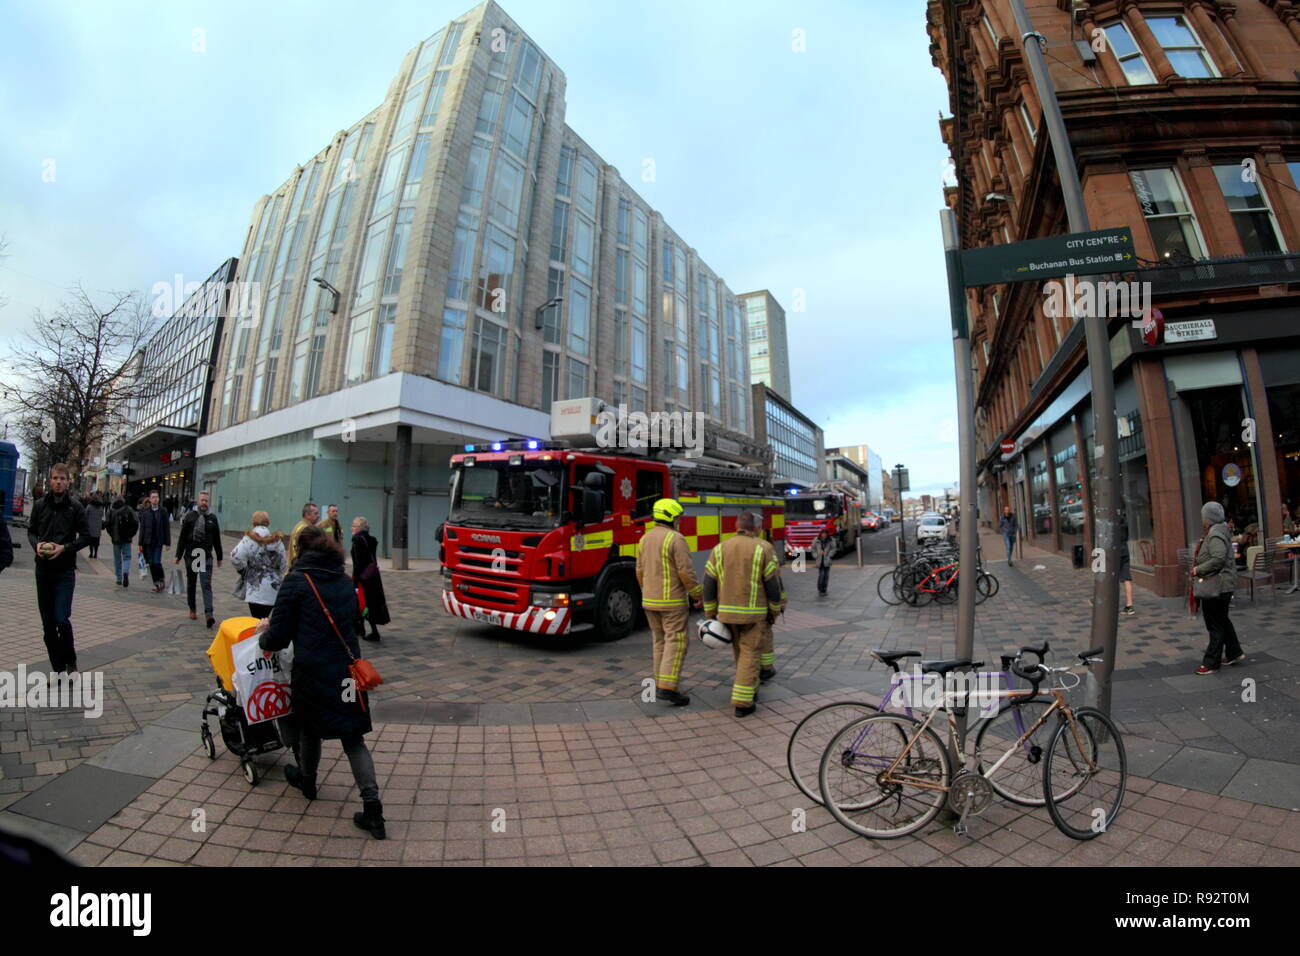 Glasgow, Scotland, UK, 19th December. Sauchiehall street received a majorr scare today as three fire engines appeared in the middle near the hill of the art school. The area has only just recovered from a series of major headline fires c entered around the Art school and the street itself. Traumatised shoppers where relieved when no major event was found. Credit Gerard Ferry/Alamy Live News Stock Photo